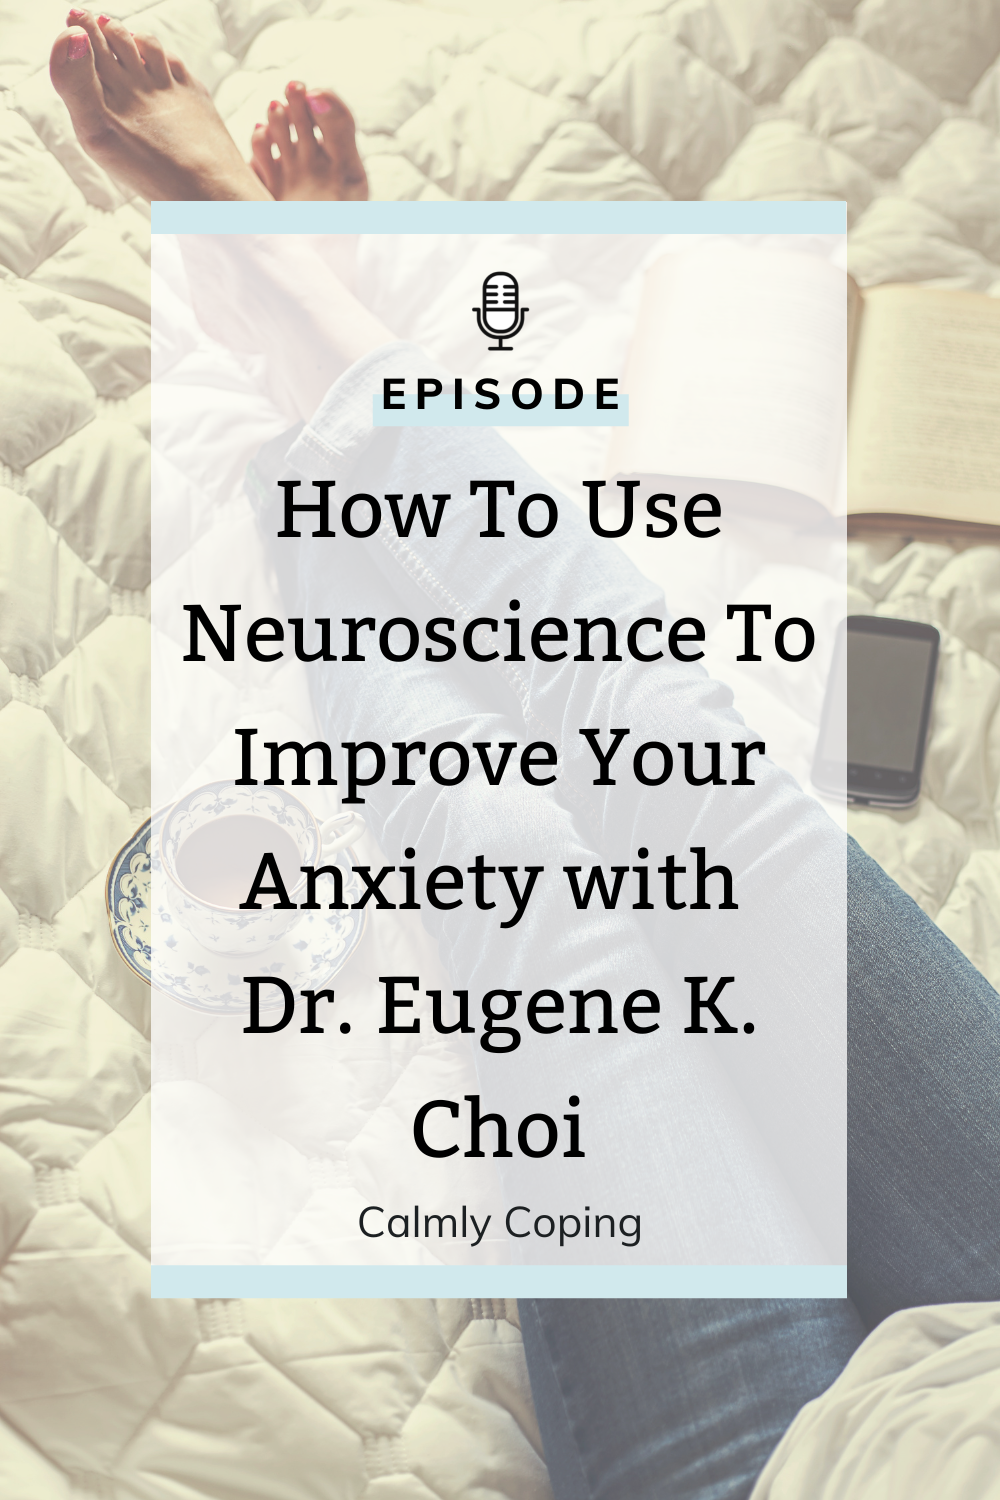 How To Use Neuroscience To Improve Your Anxiety with Dr. Eugene K. Choi